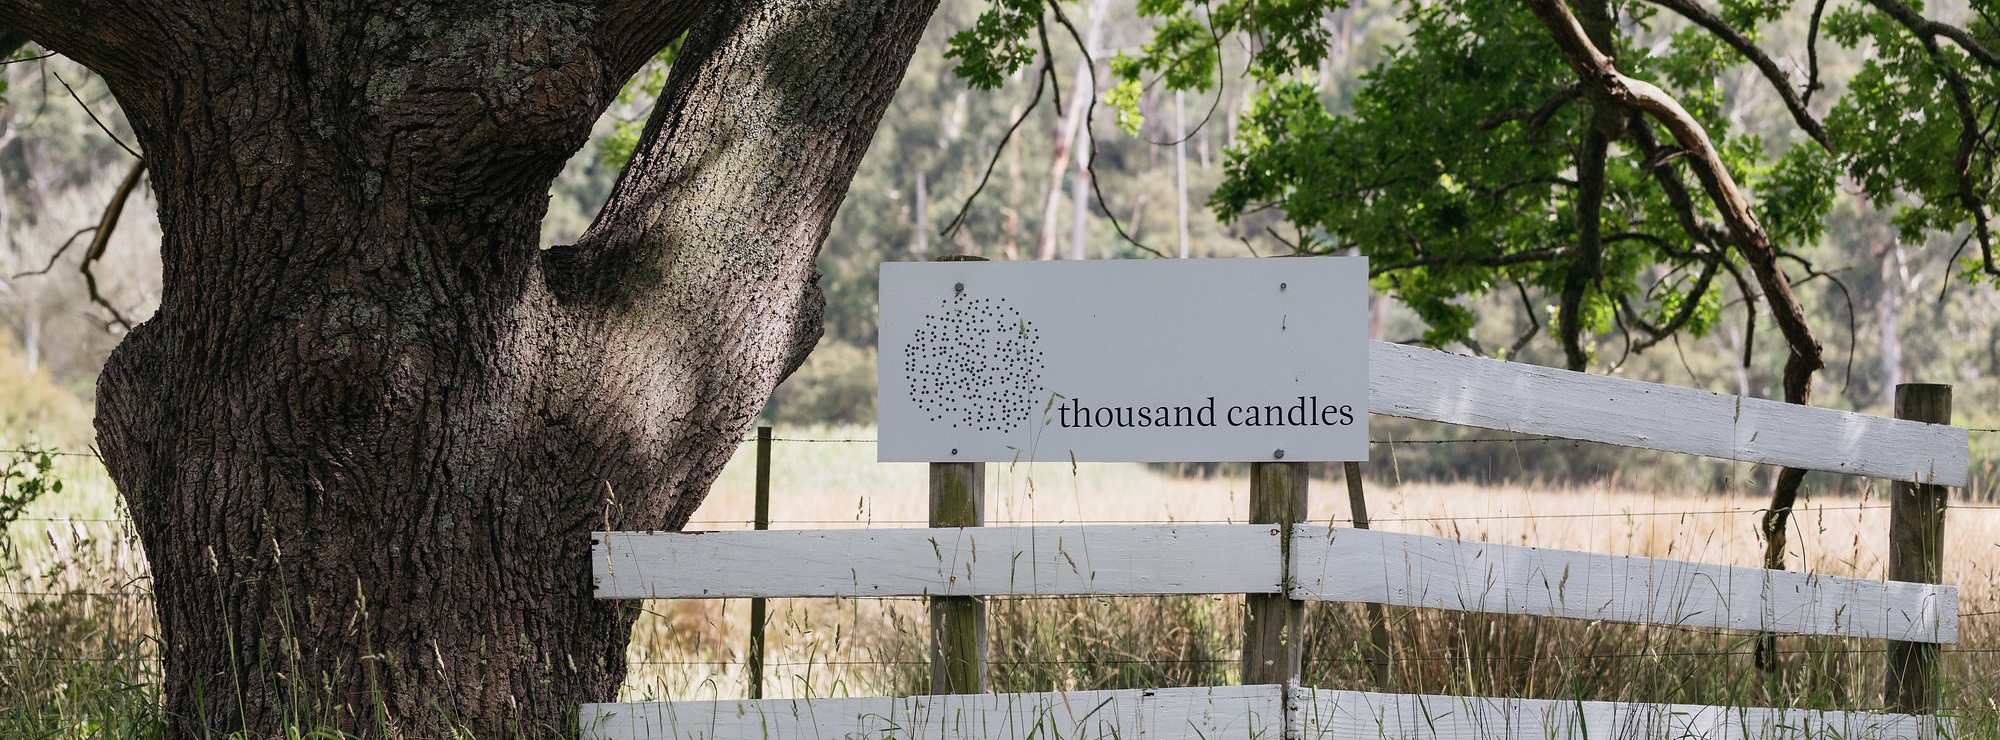 thousand candles 2